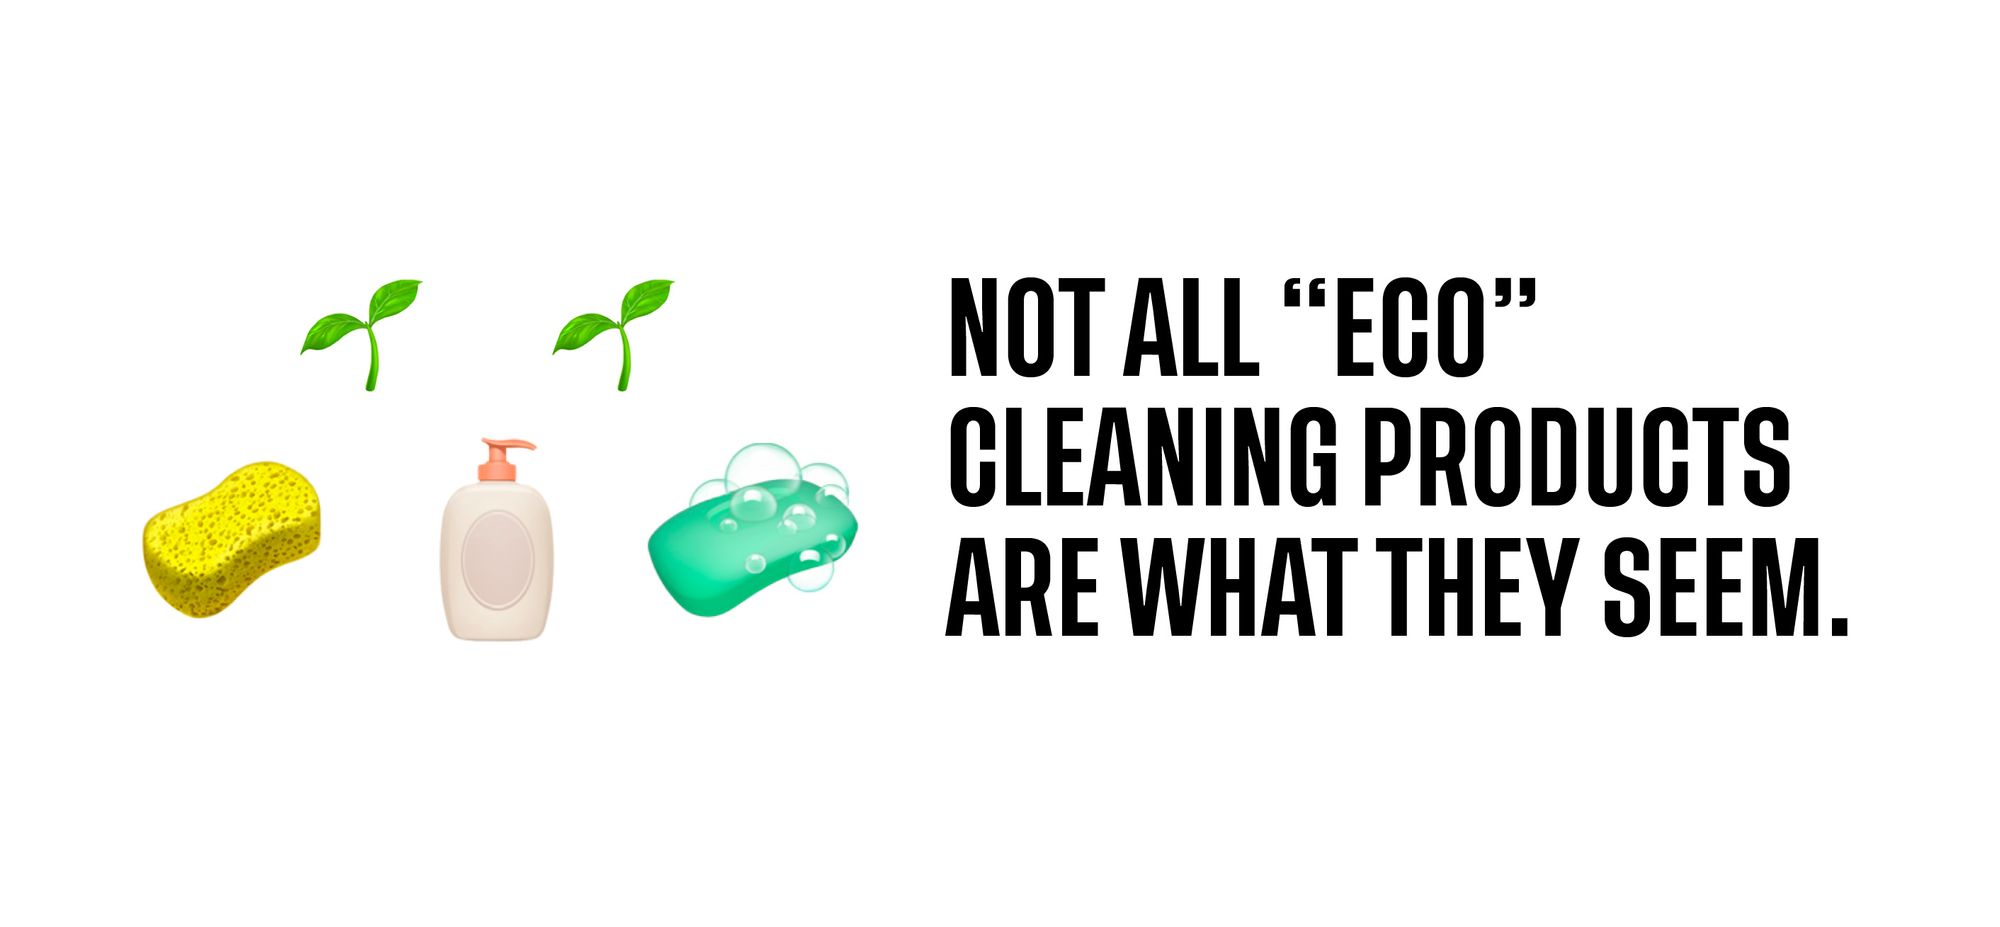 Not all “eco” cleaning products are what they seem.